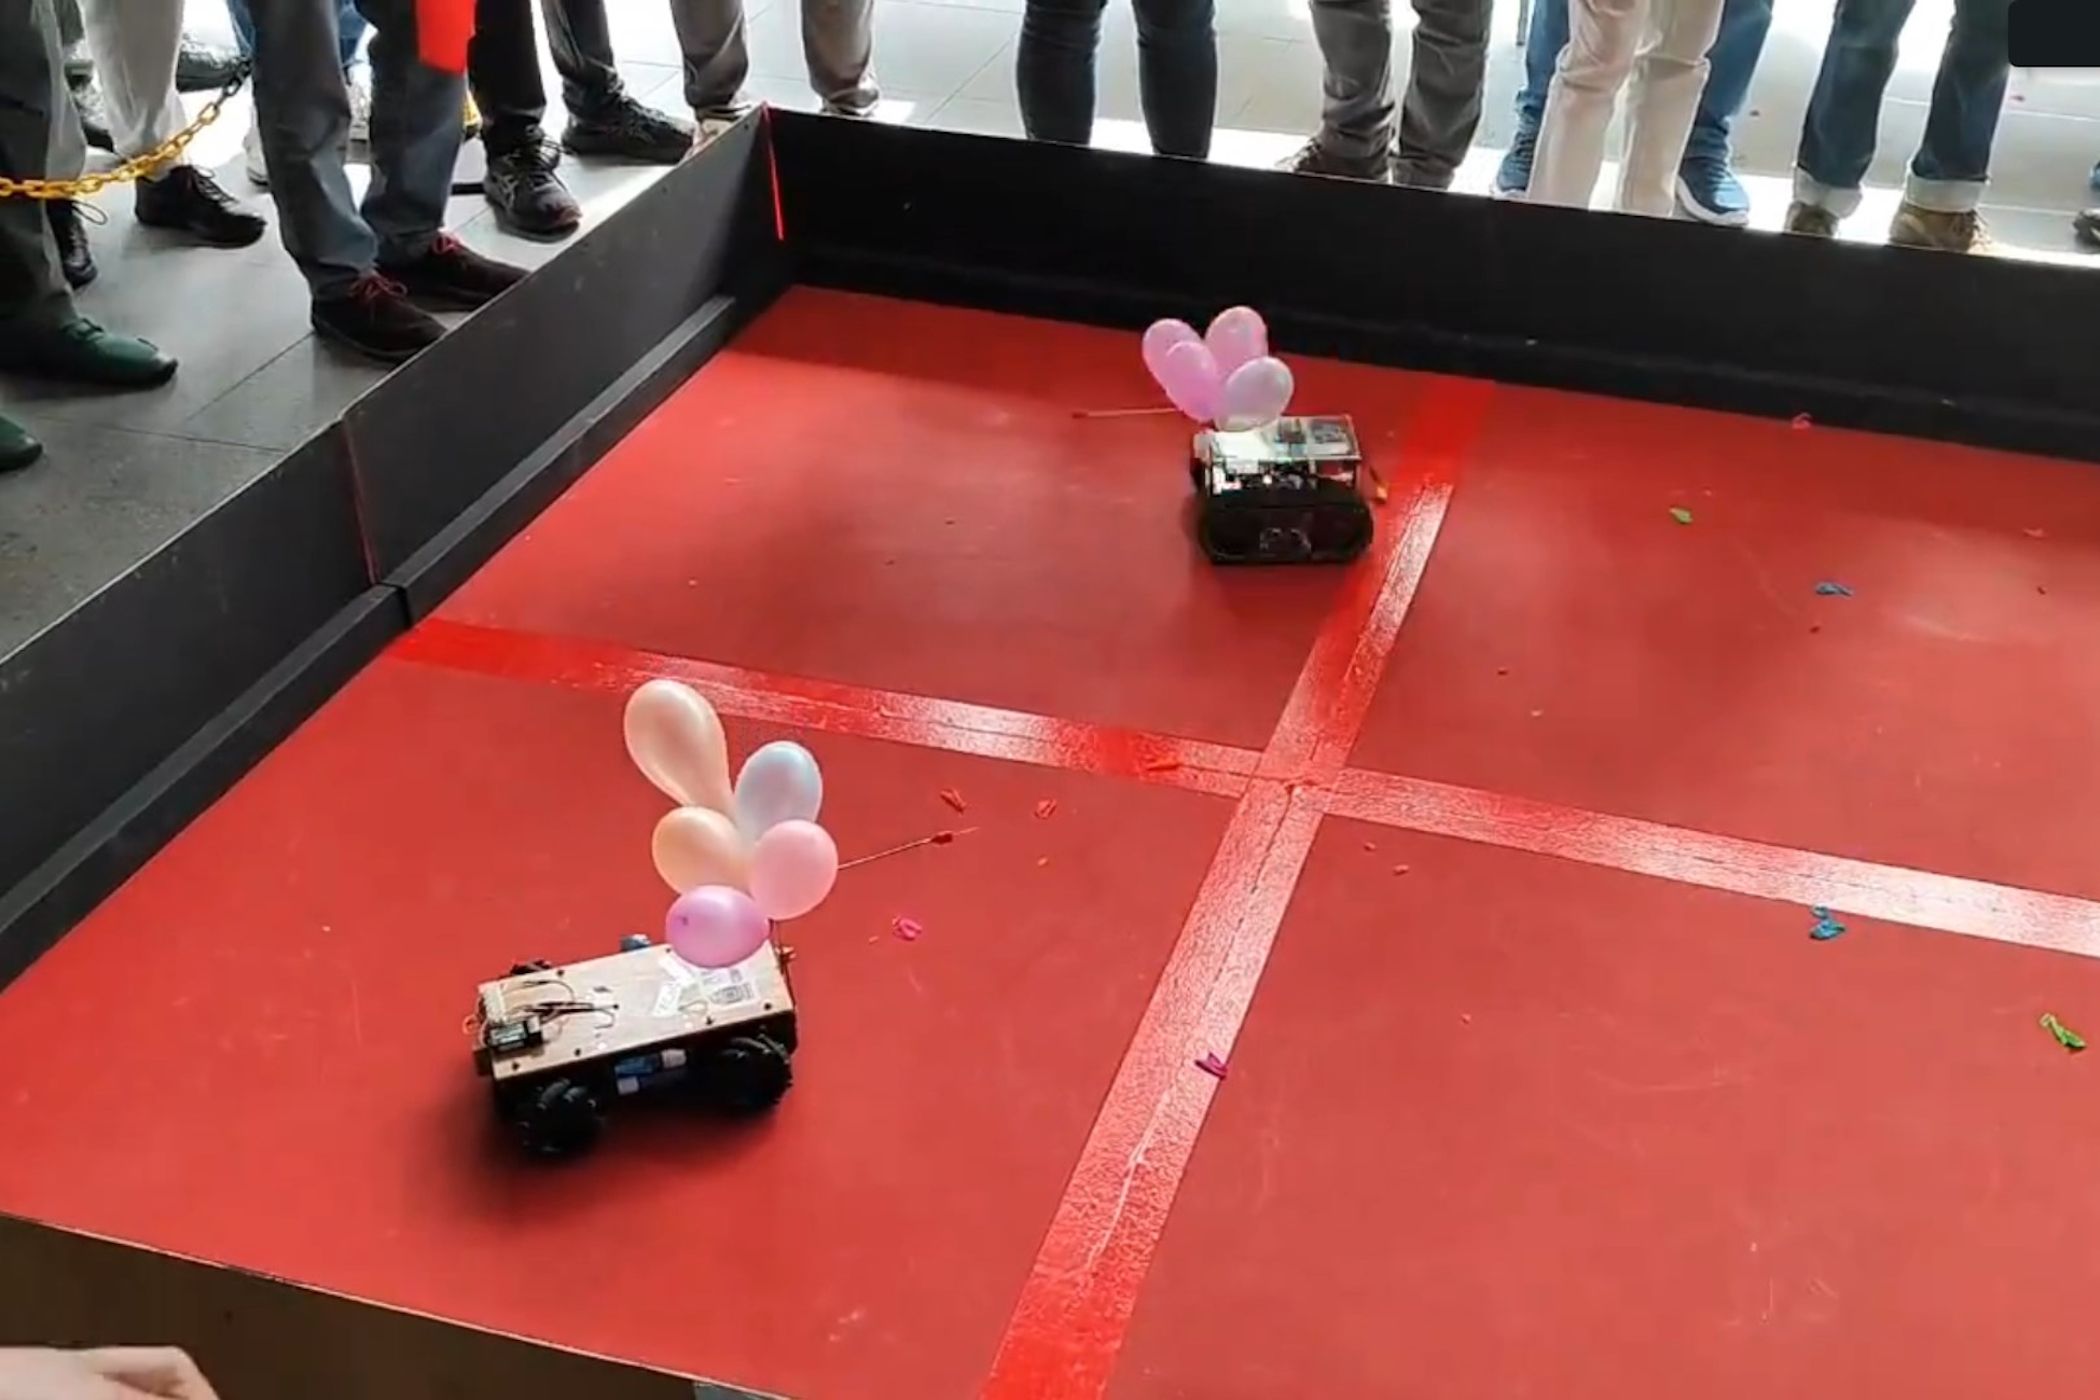 Pi Wars pits SBC robots against one another, and it returned after a 5-year break